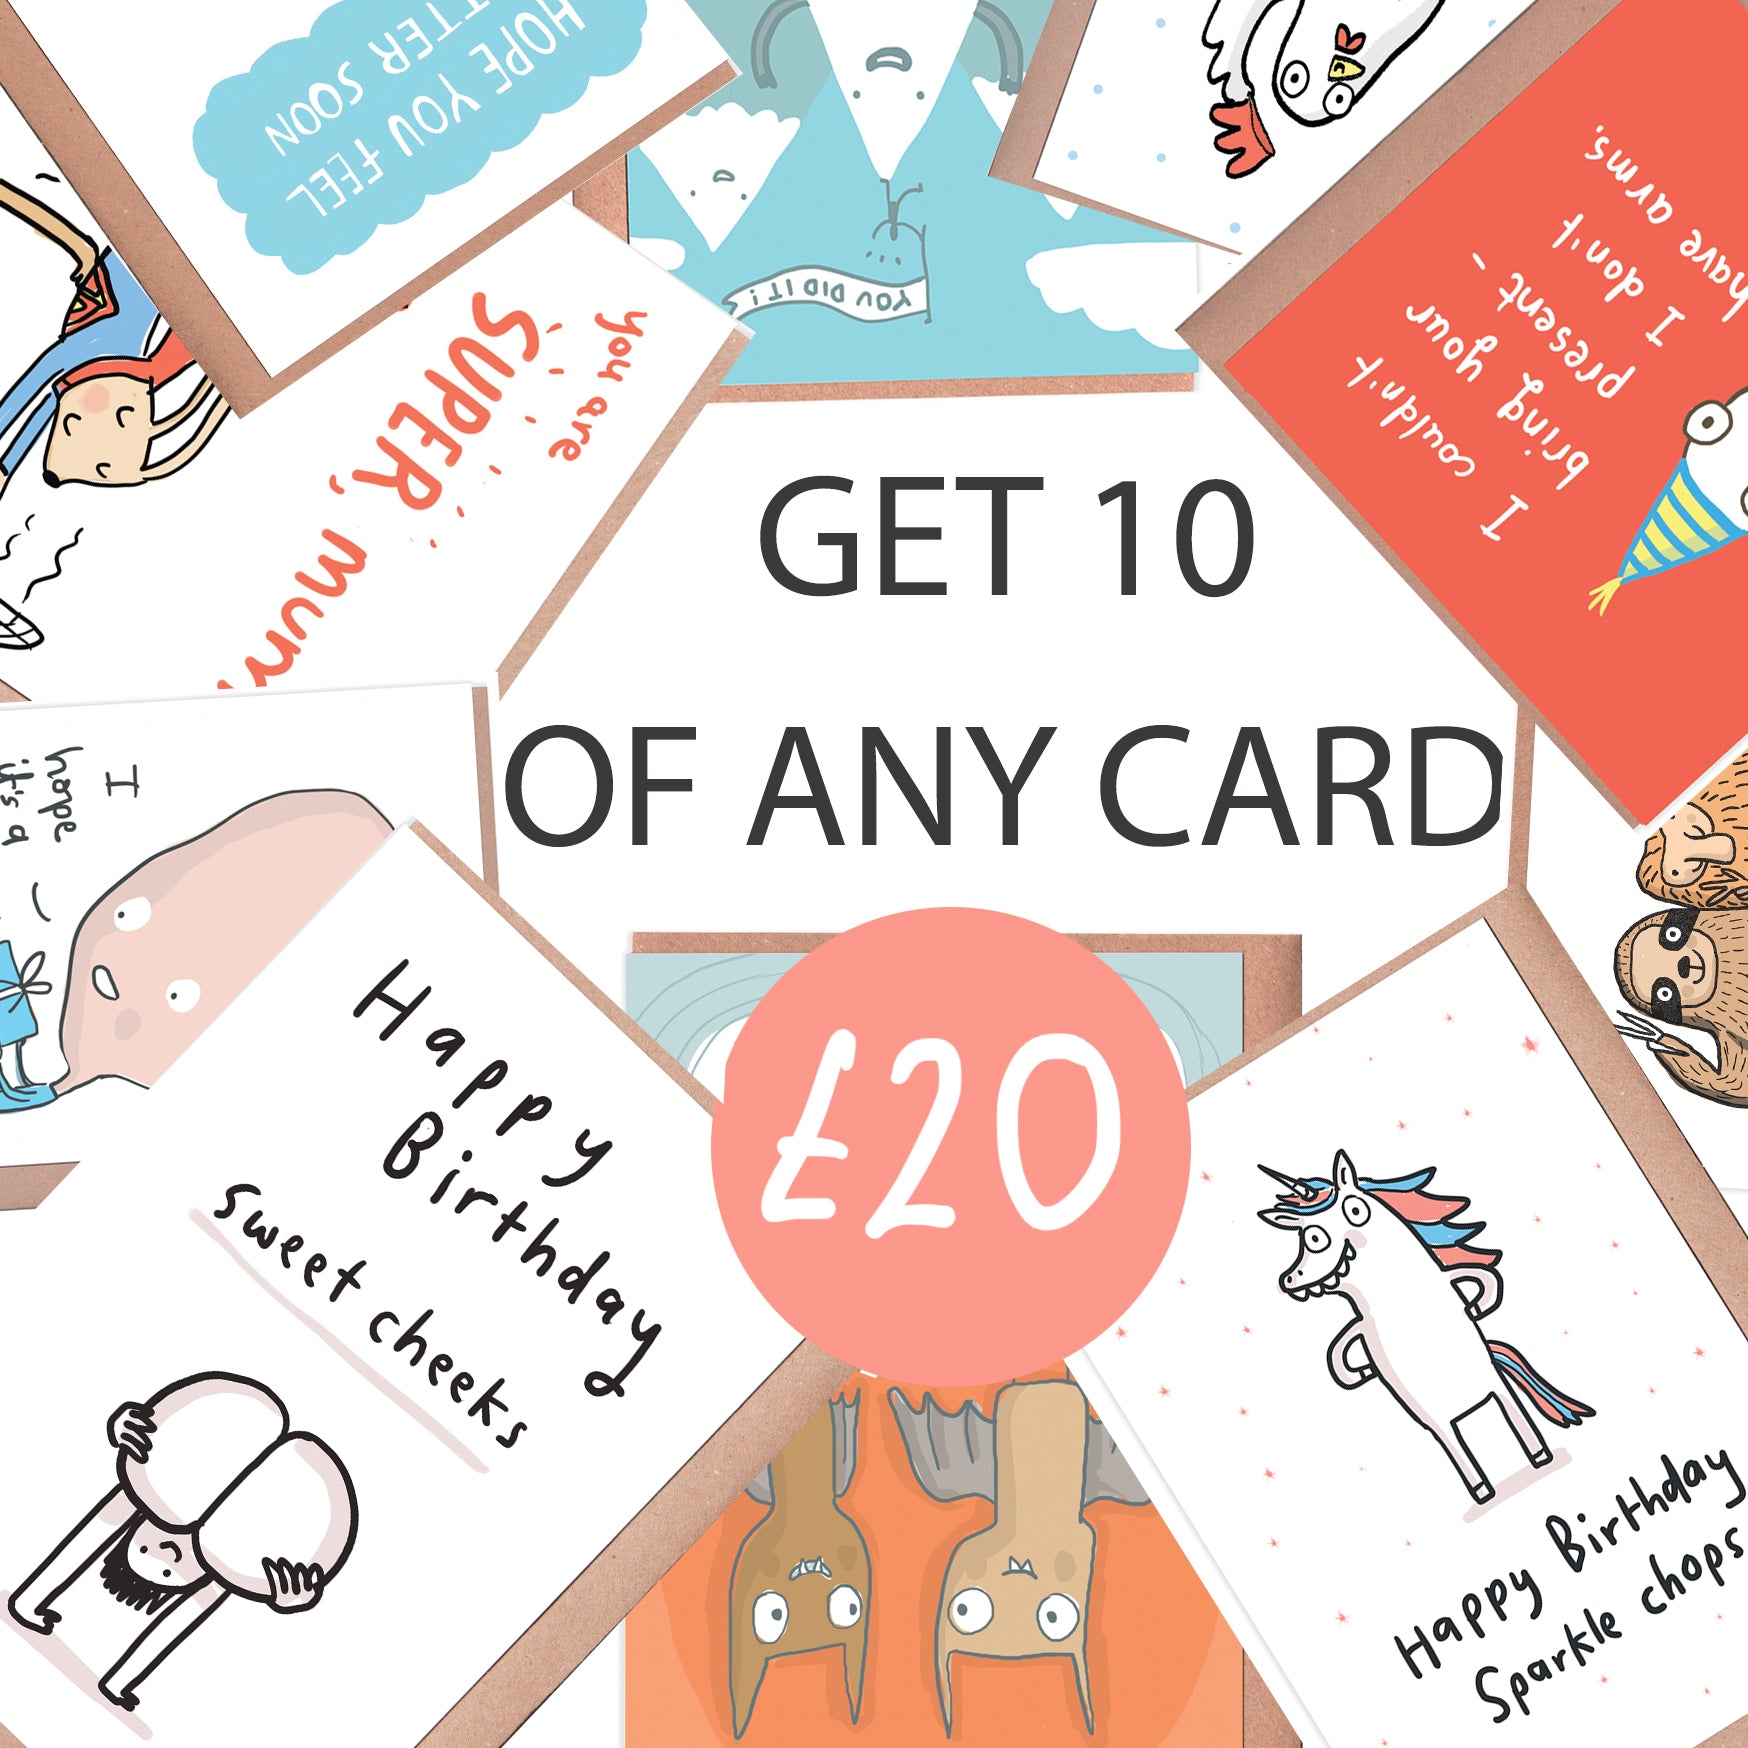 Get 10 of any card DEAL